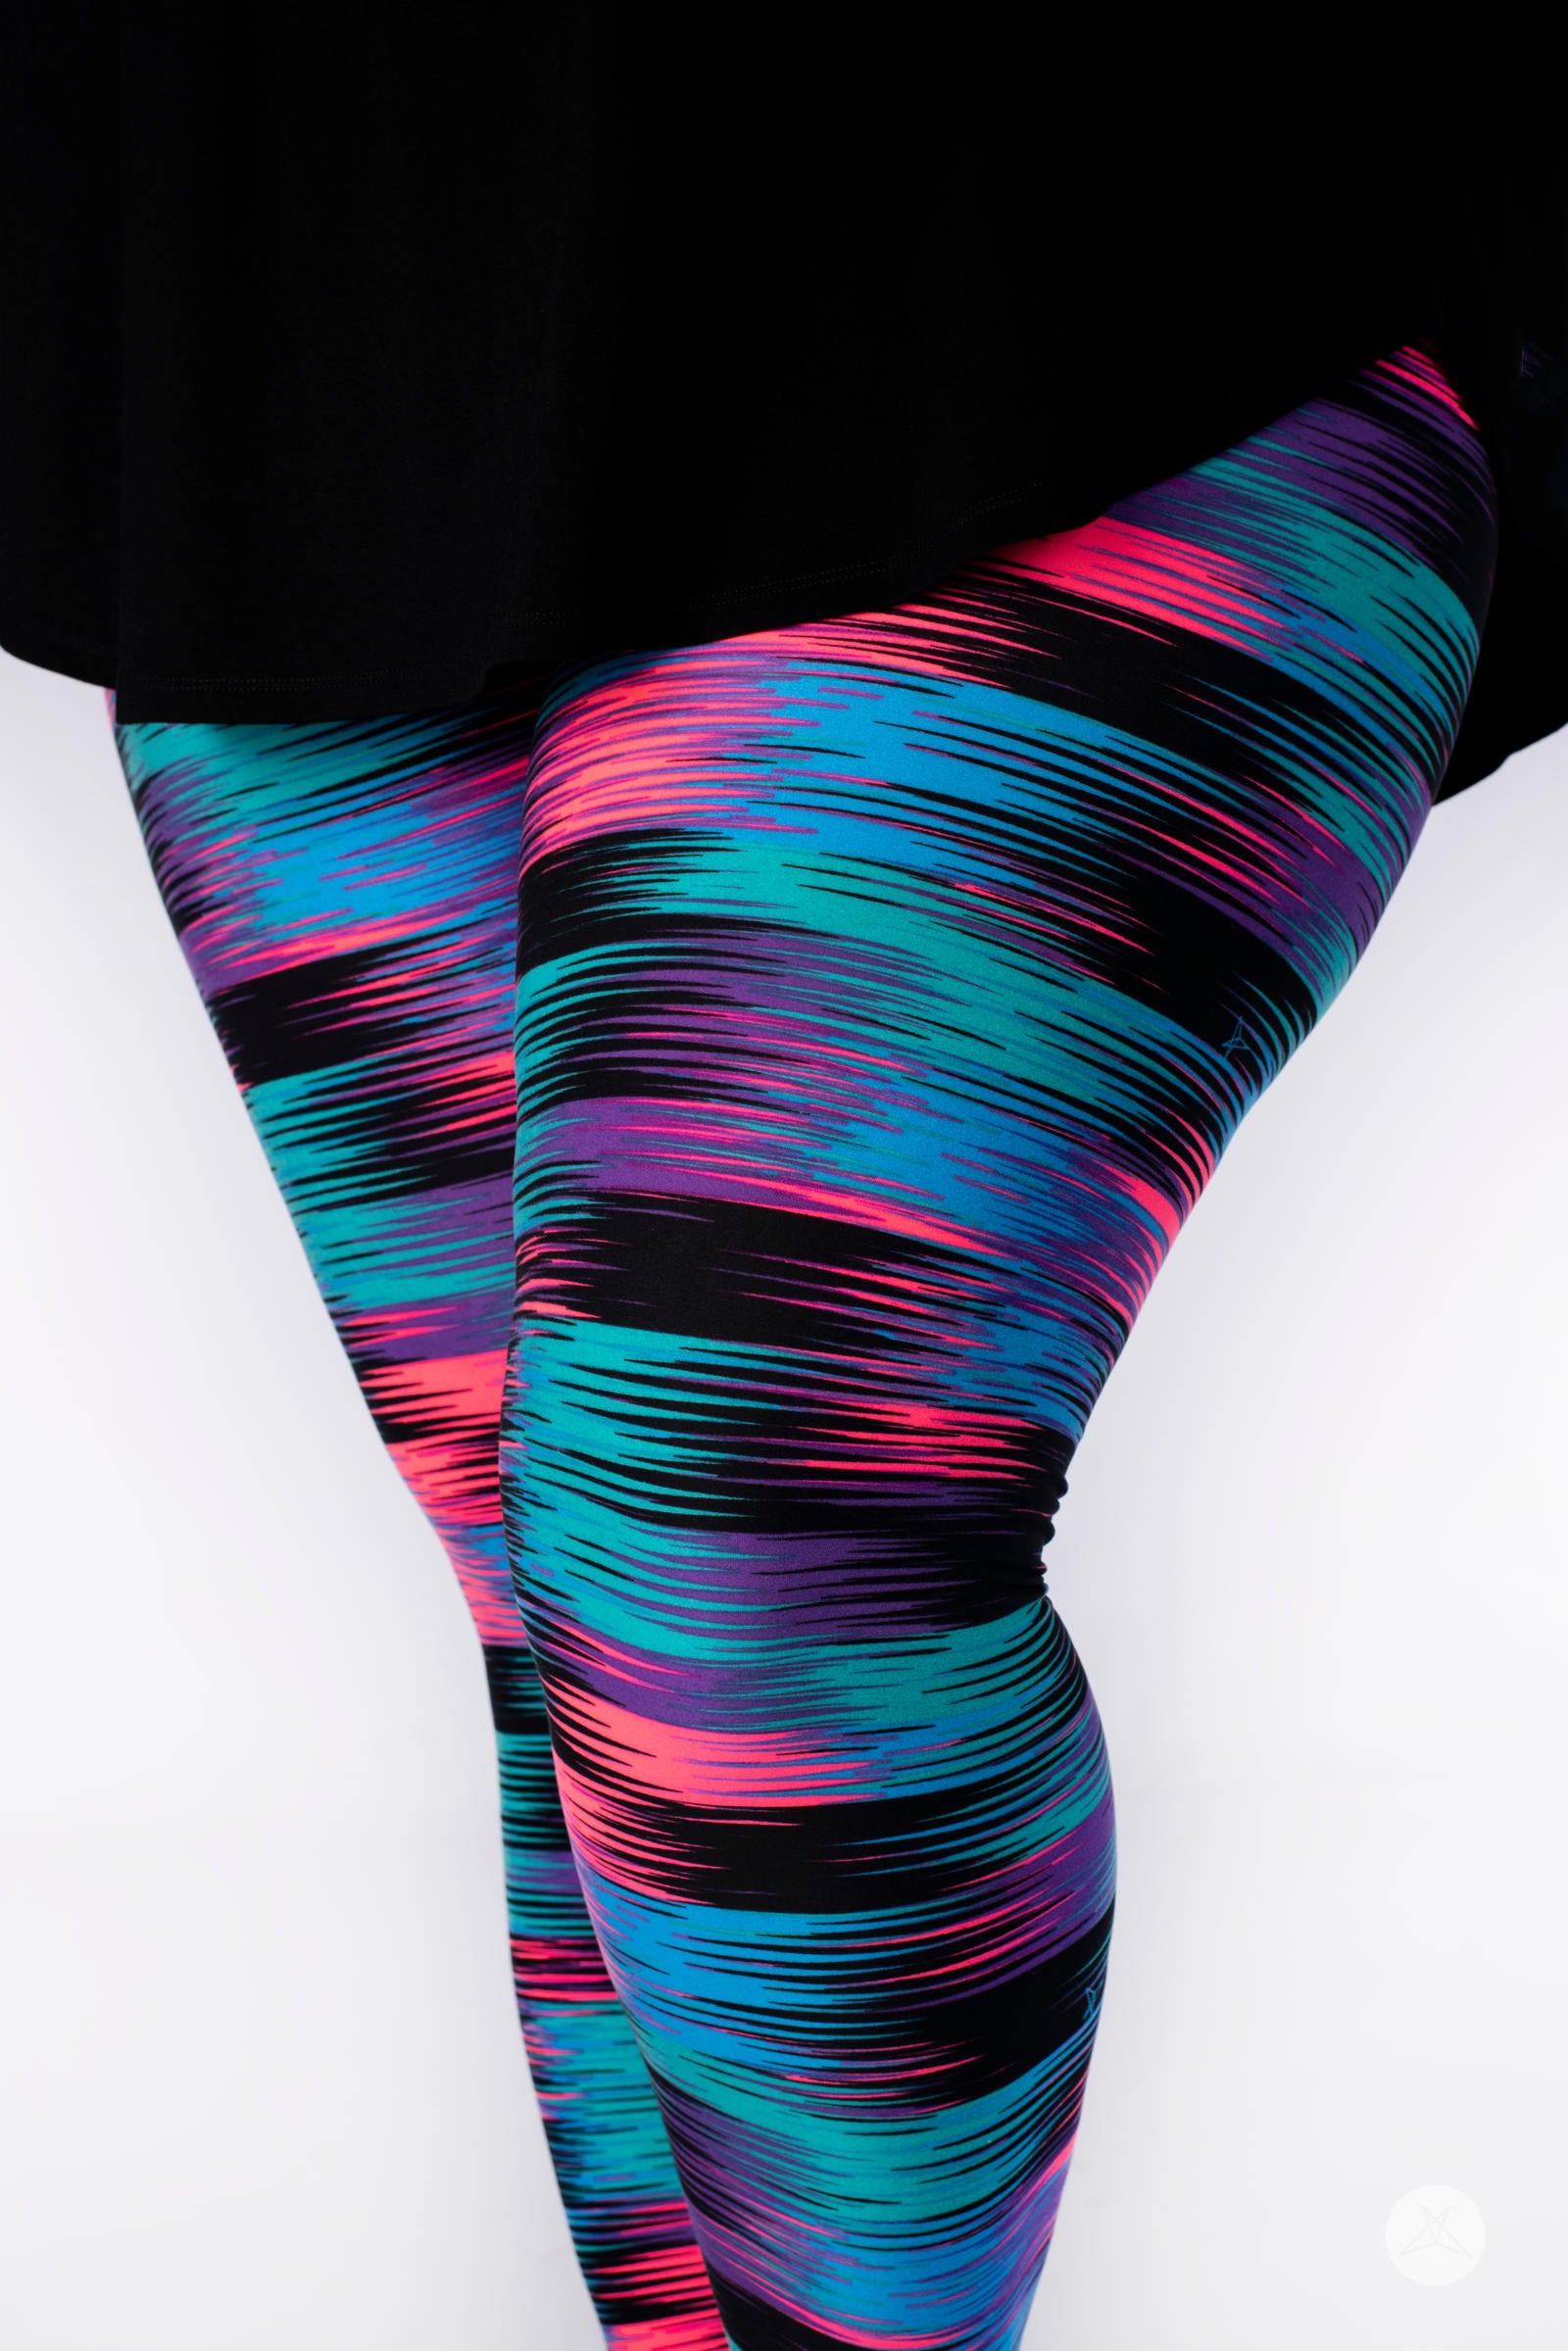 colorful cute monsters Leggings for Sale by Fashion-Trends